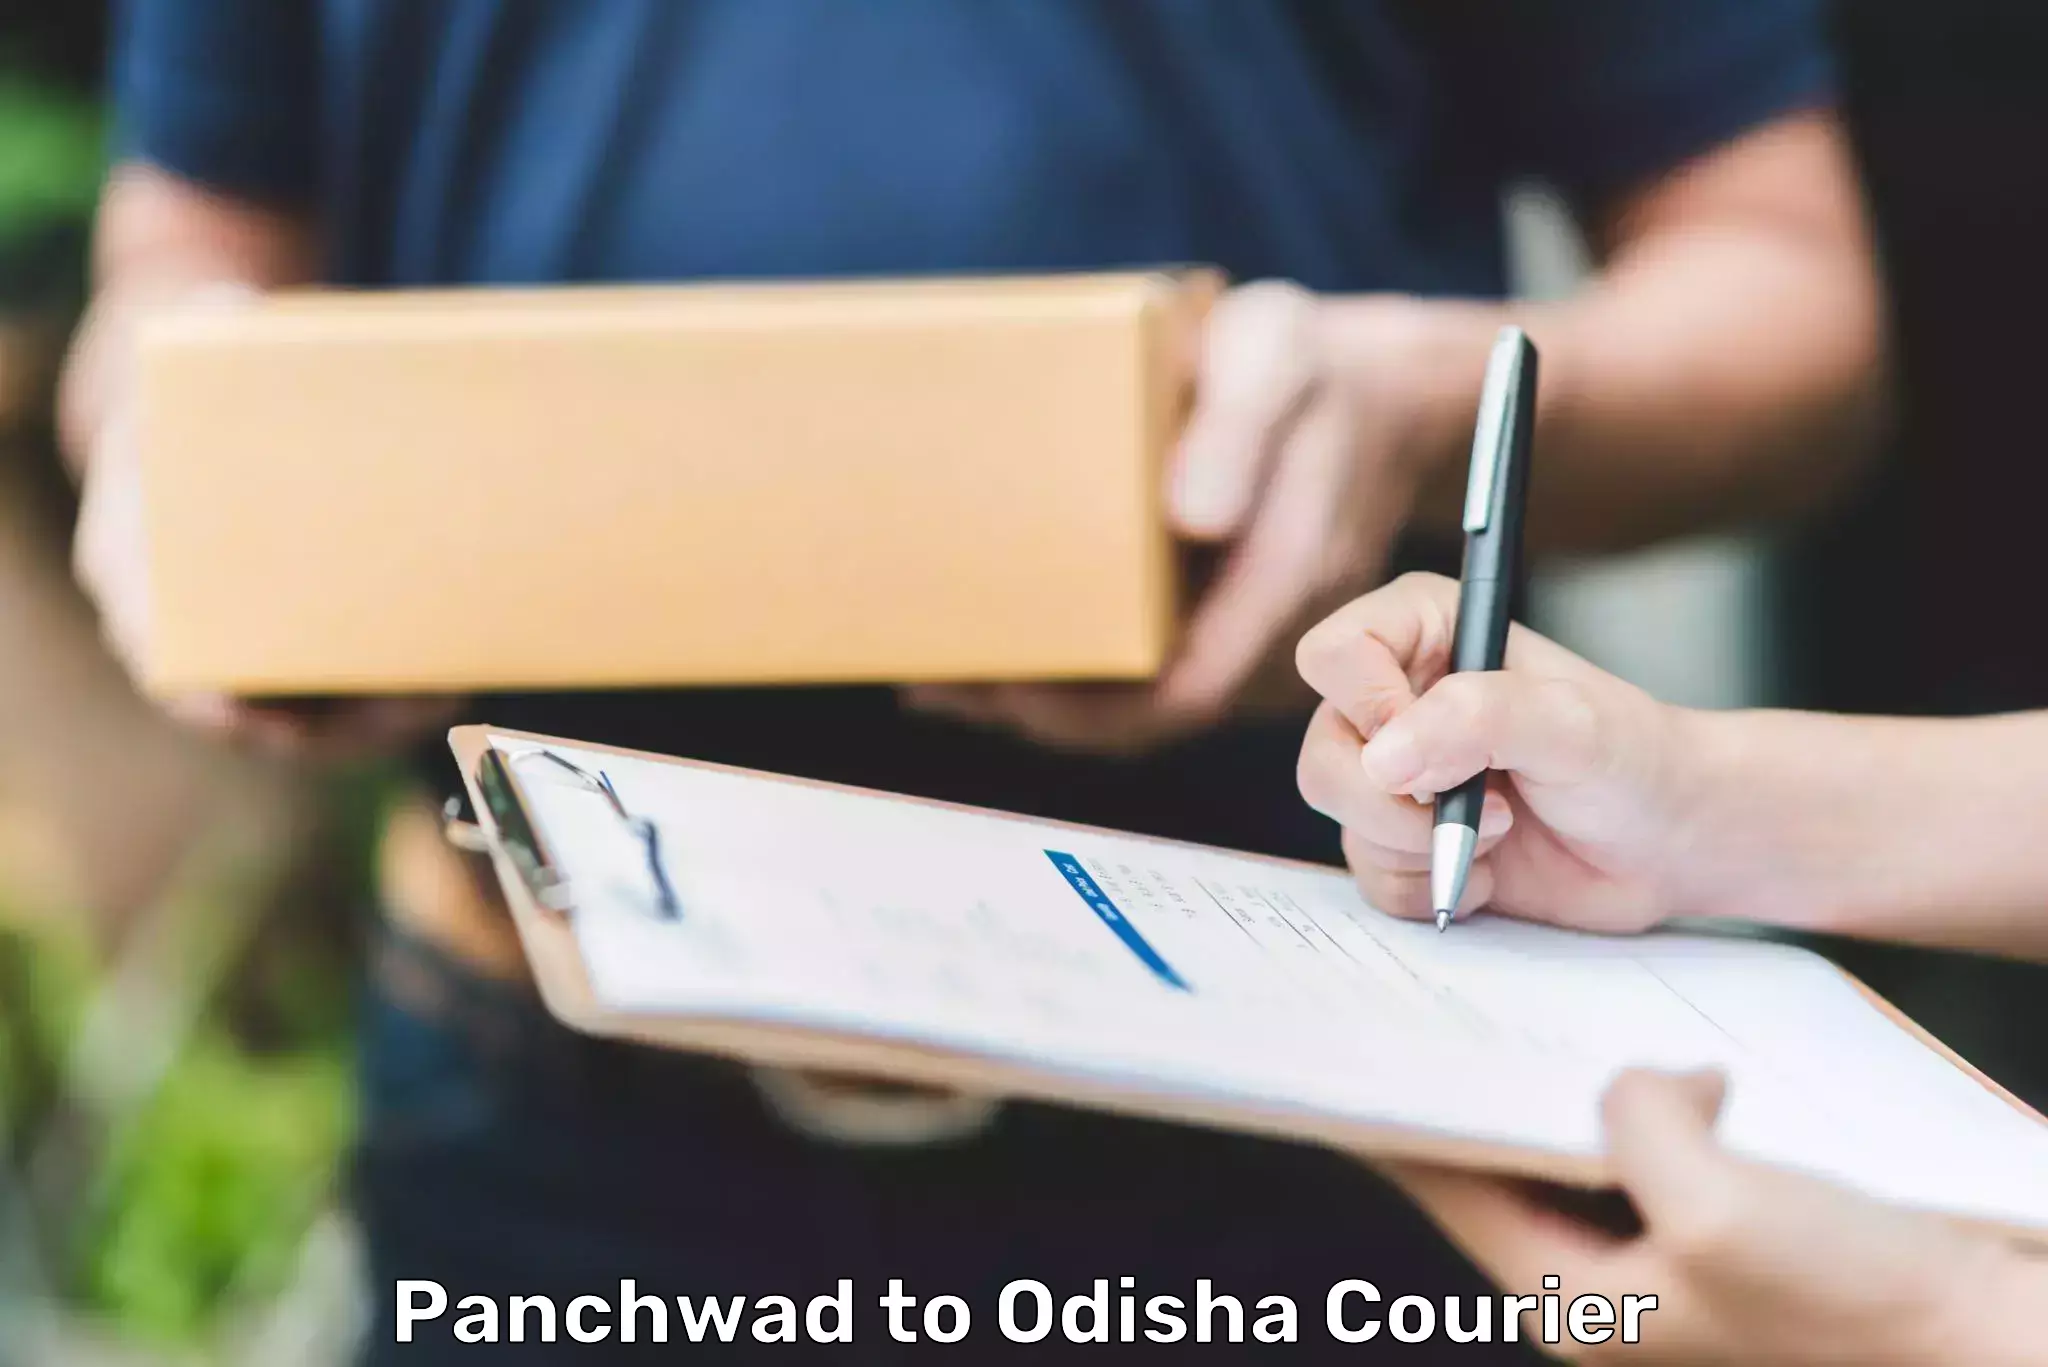 Cash on delivery service Panchwad to Sohela